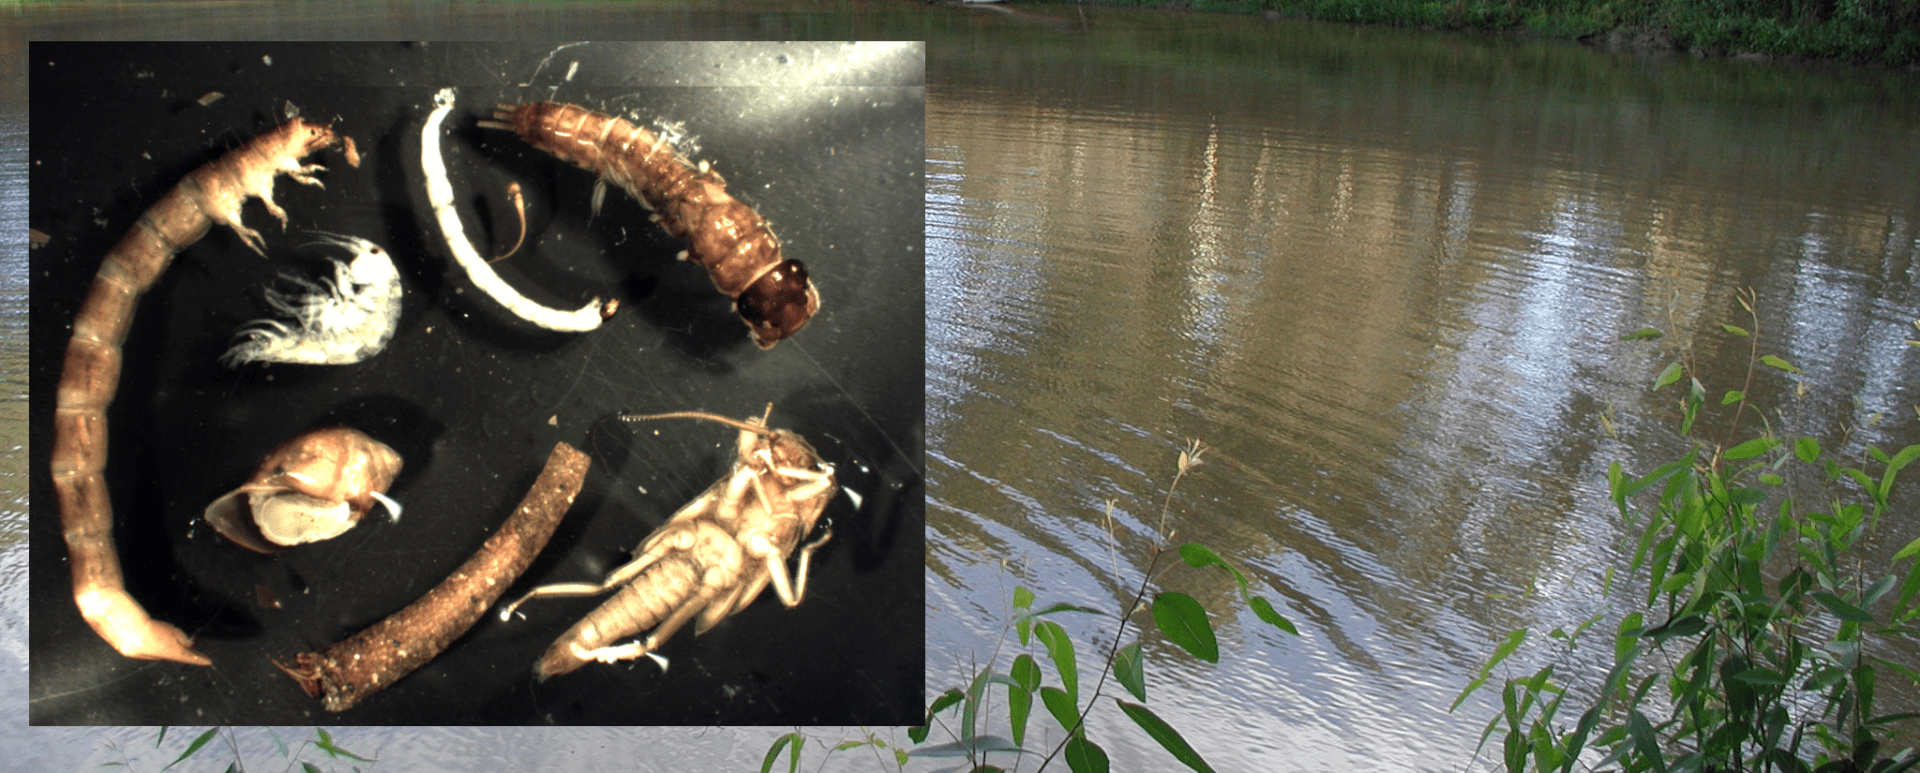 Using unsorted sweep-net samples to rapidly assess macroinvertebrate biodiversity